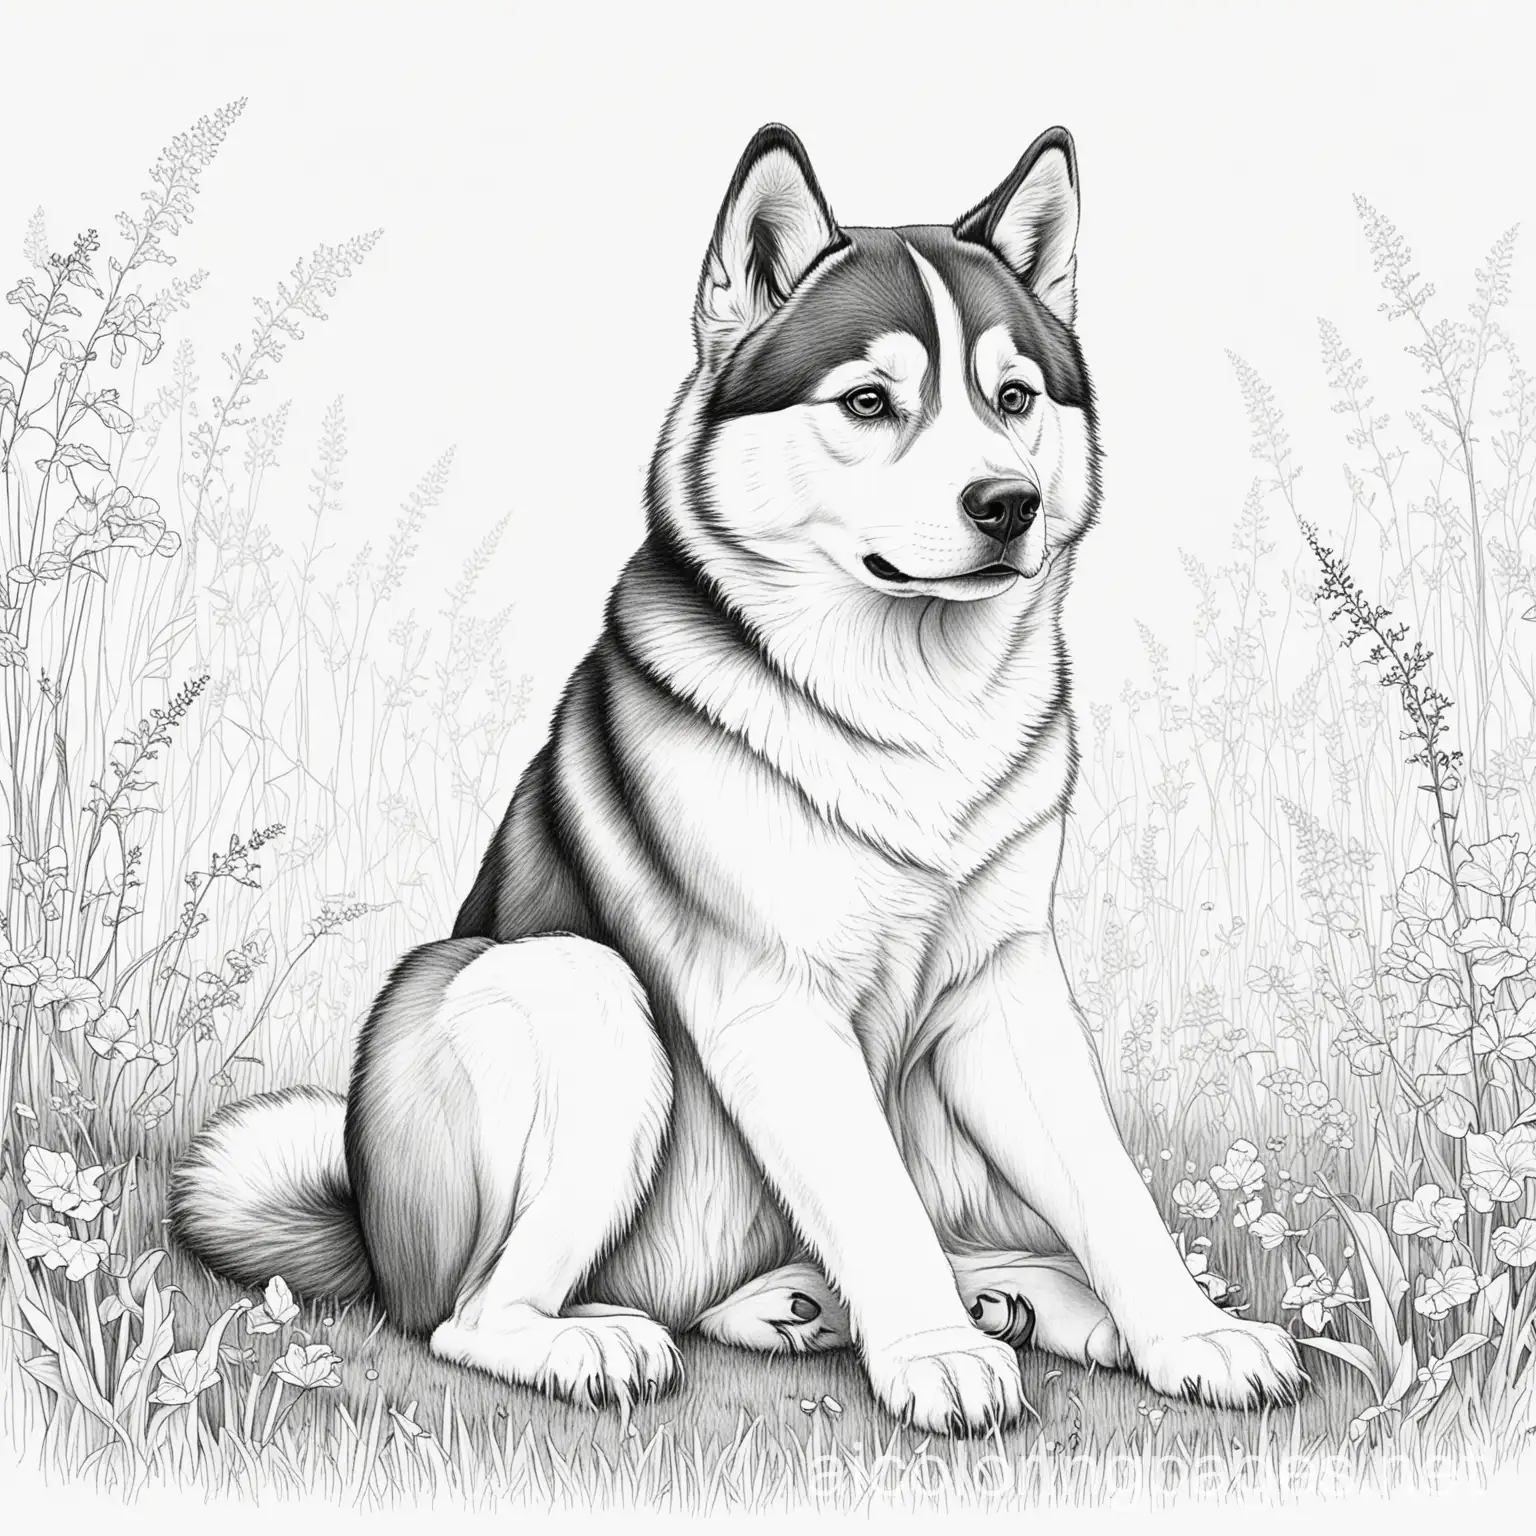 Huskey sitting on the grass, Coloring Page, black and white, line art, white background, Simplicity, Ample White Space. The background of the coloring page is plain white to make it easy for young children to color within the lines. The outlines of all the subjects are easy to distinguish, making it simple for kids to color without too much difficulty